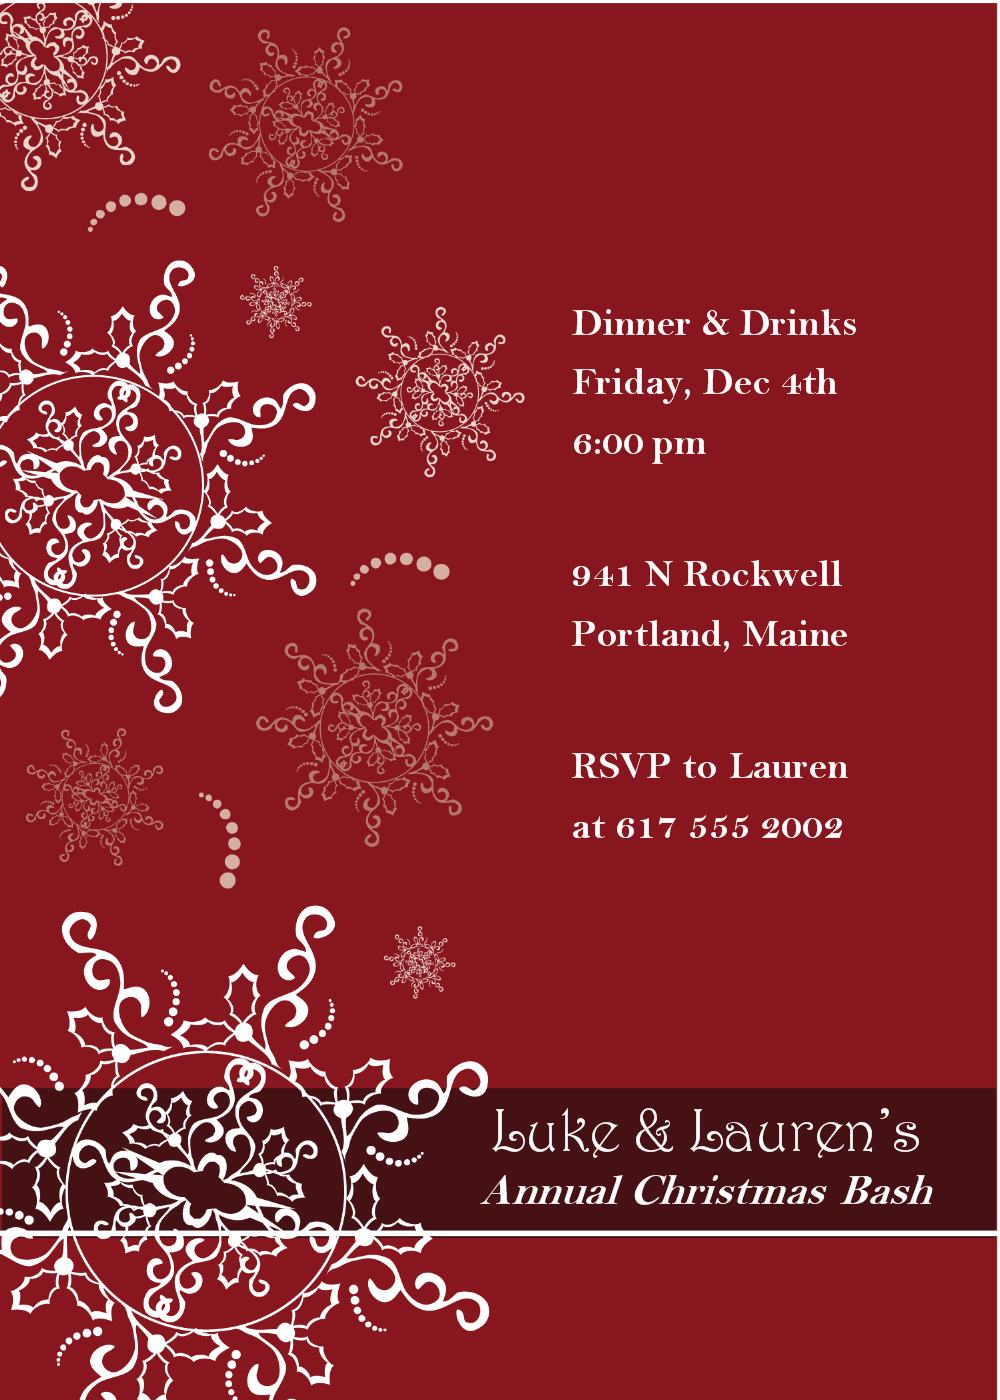 Christmas Party Invitation Templates Free Word Inside Free Dinner Invitation Templates For Word